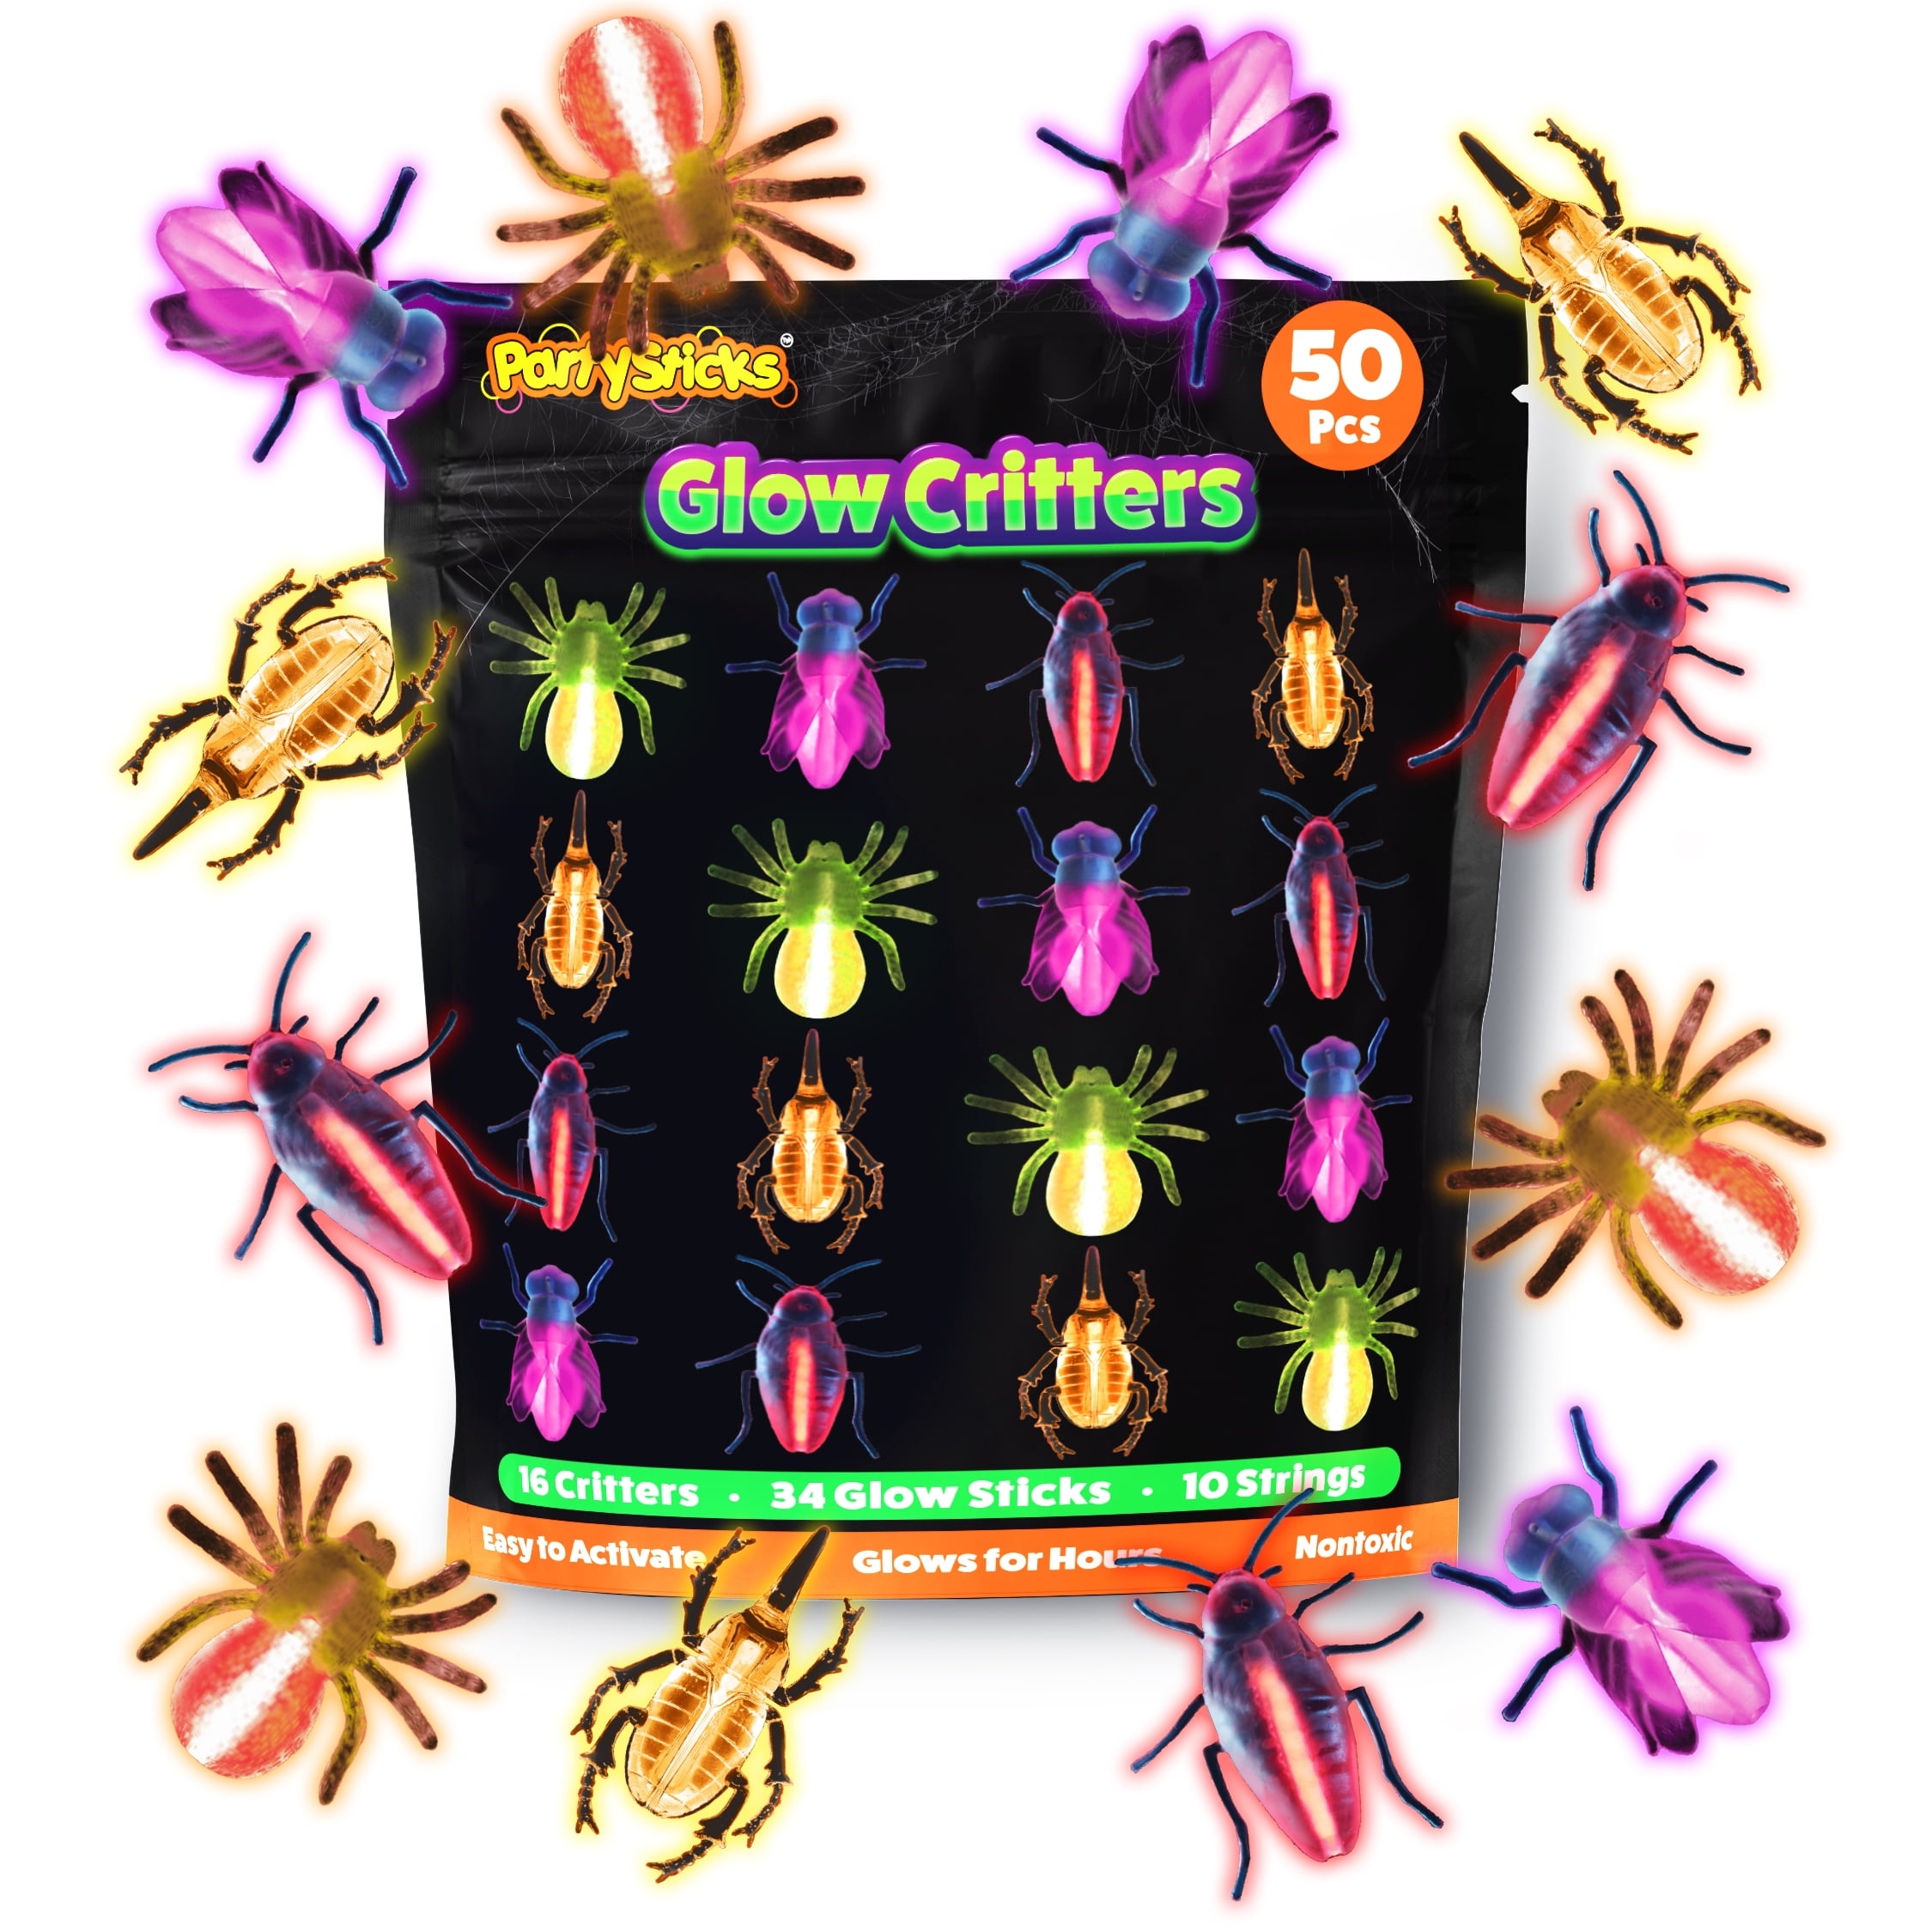 PartySticks Glow Critters 50pk Glow in The Dark Bug Toys and Glow Sticks - 2.5 inch Fake Bugs Party Favors, Glow in The Dark par